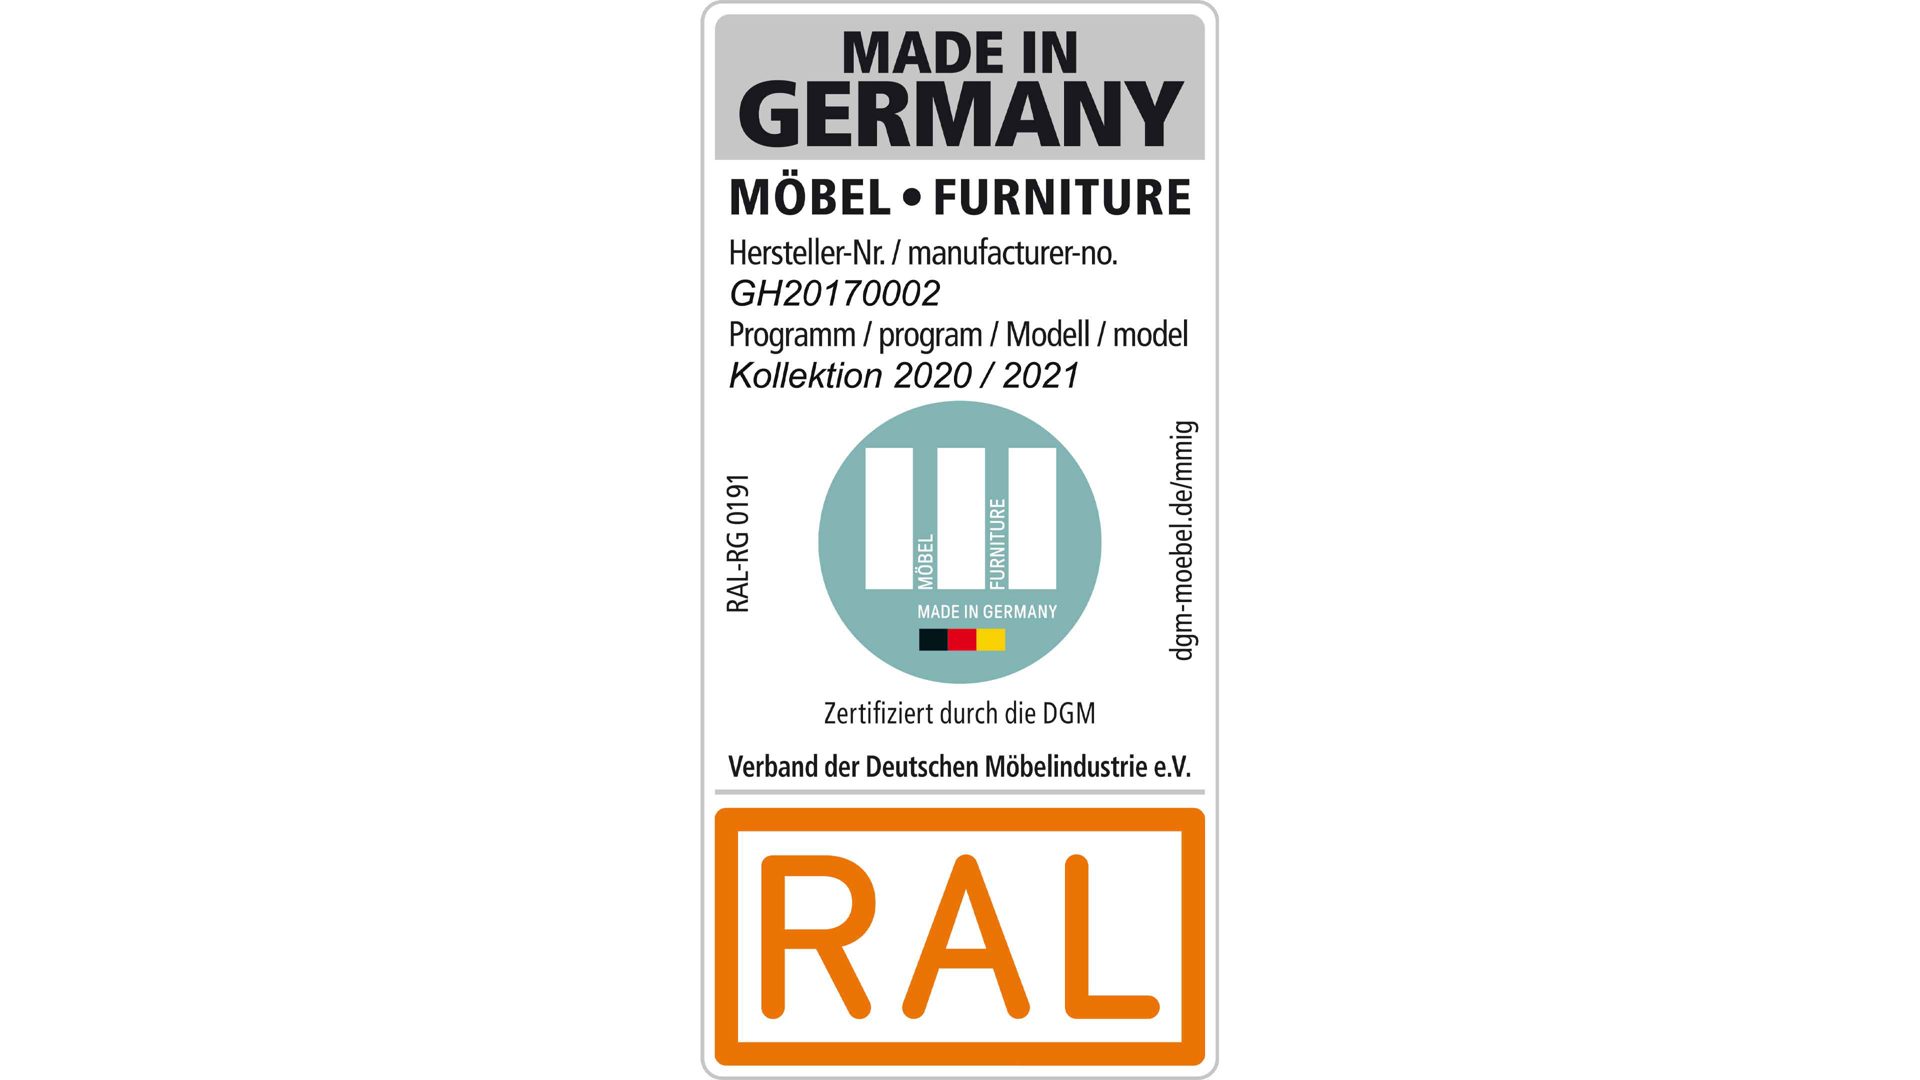 Hapo   RAL Made in Germany